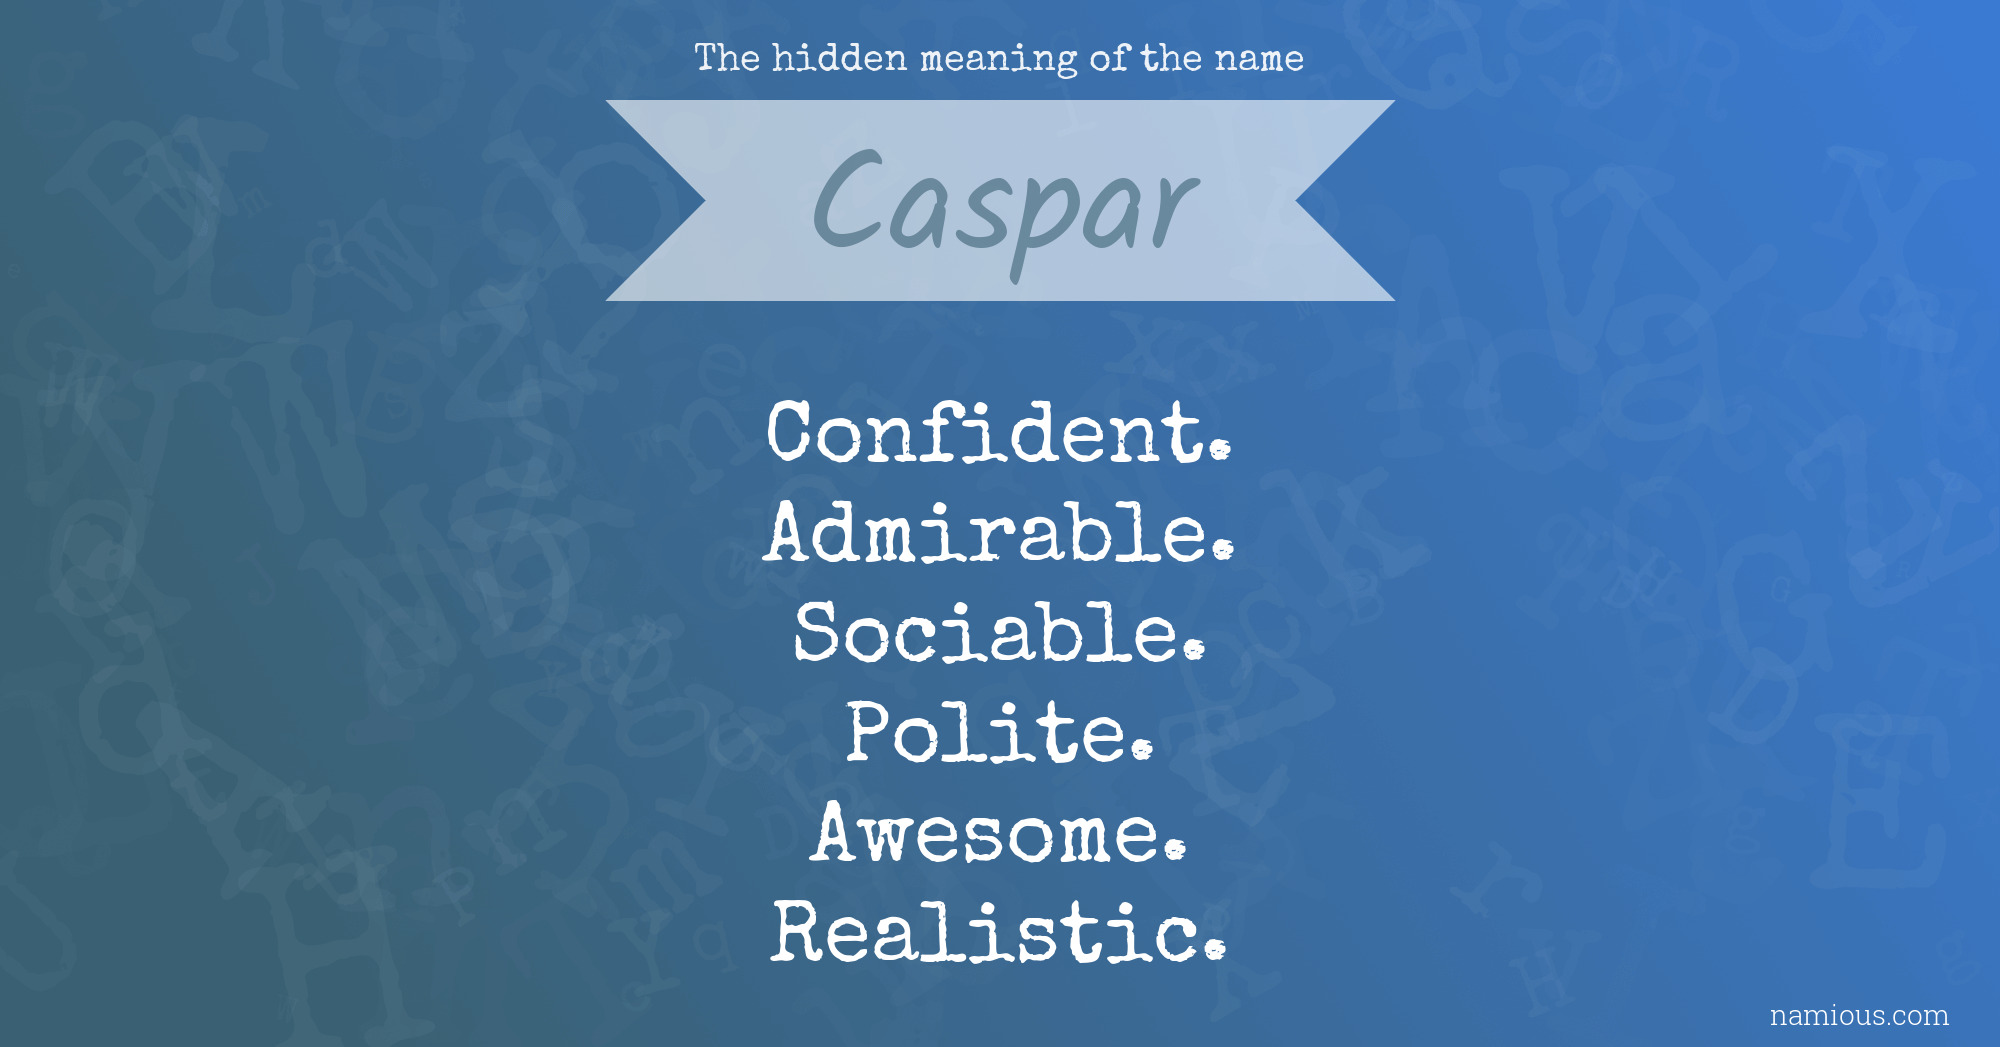 The hidden meaning of the name Caspar